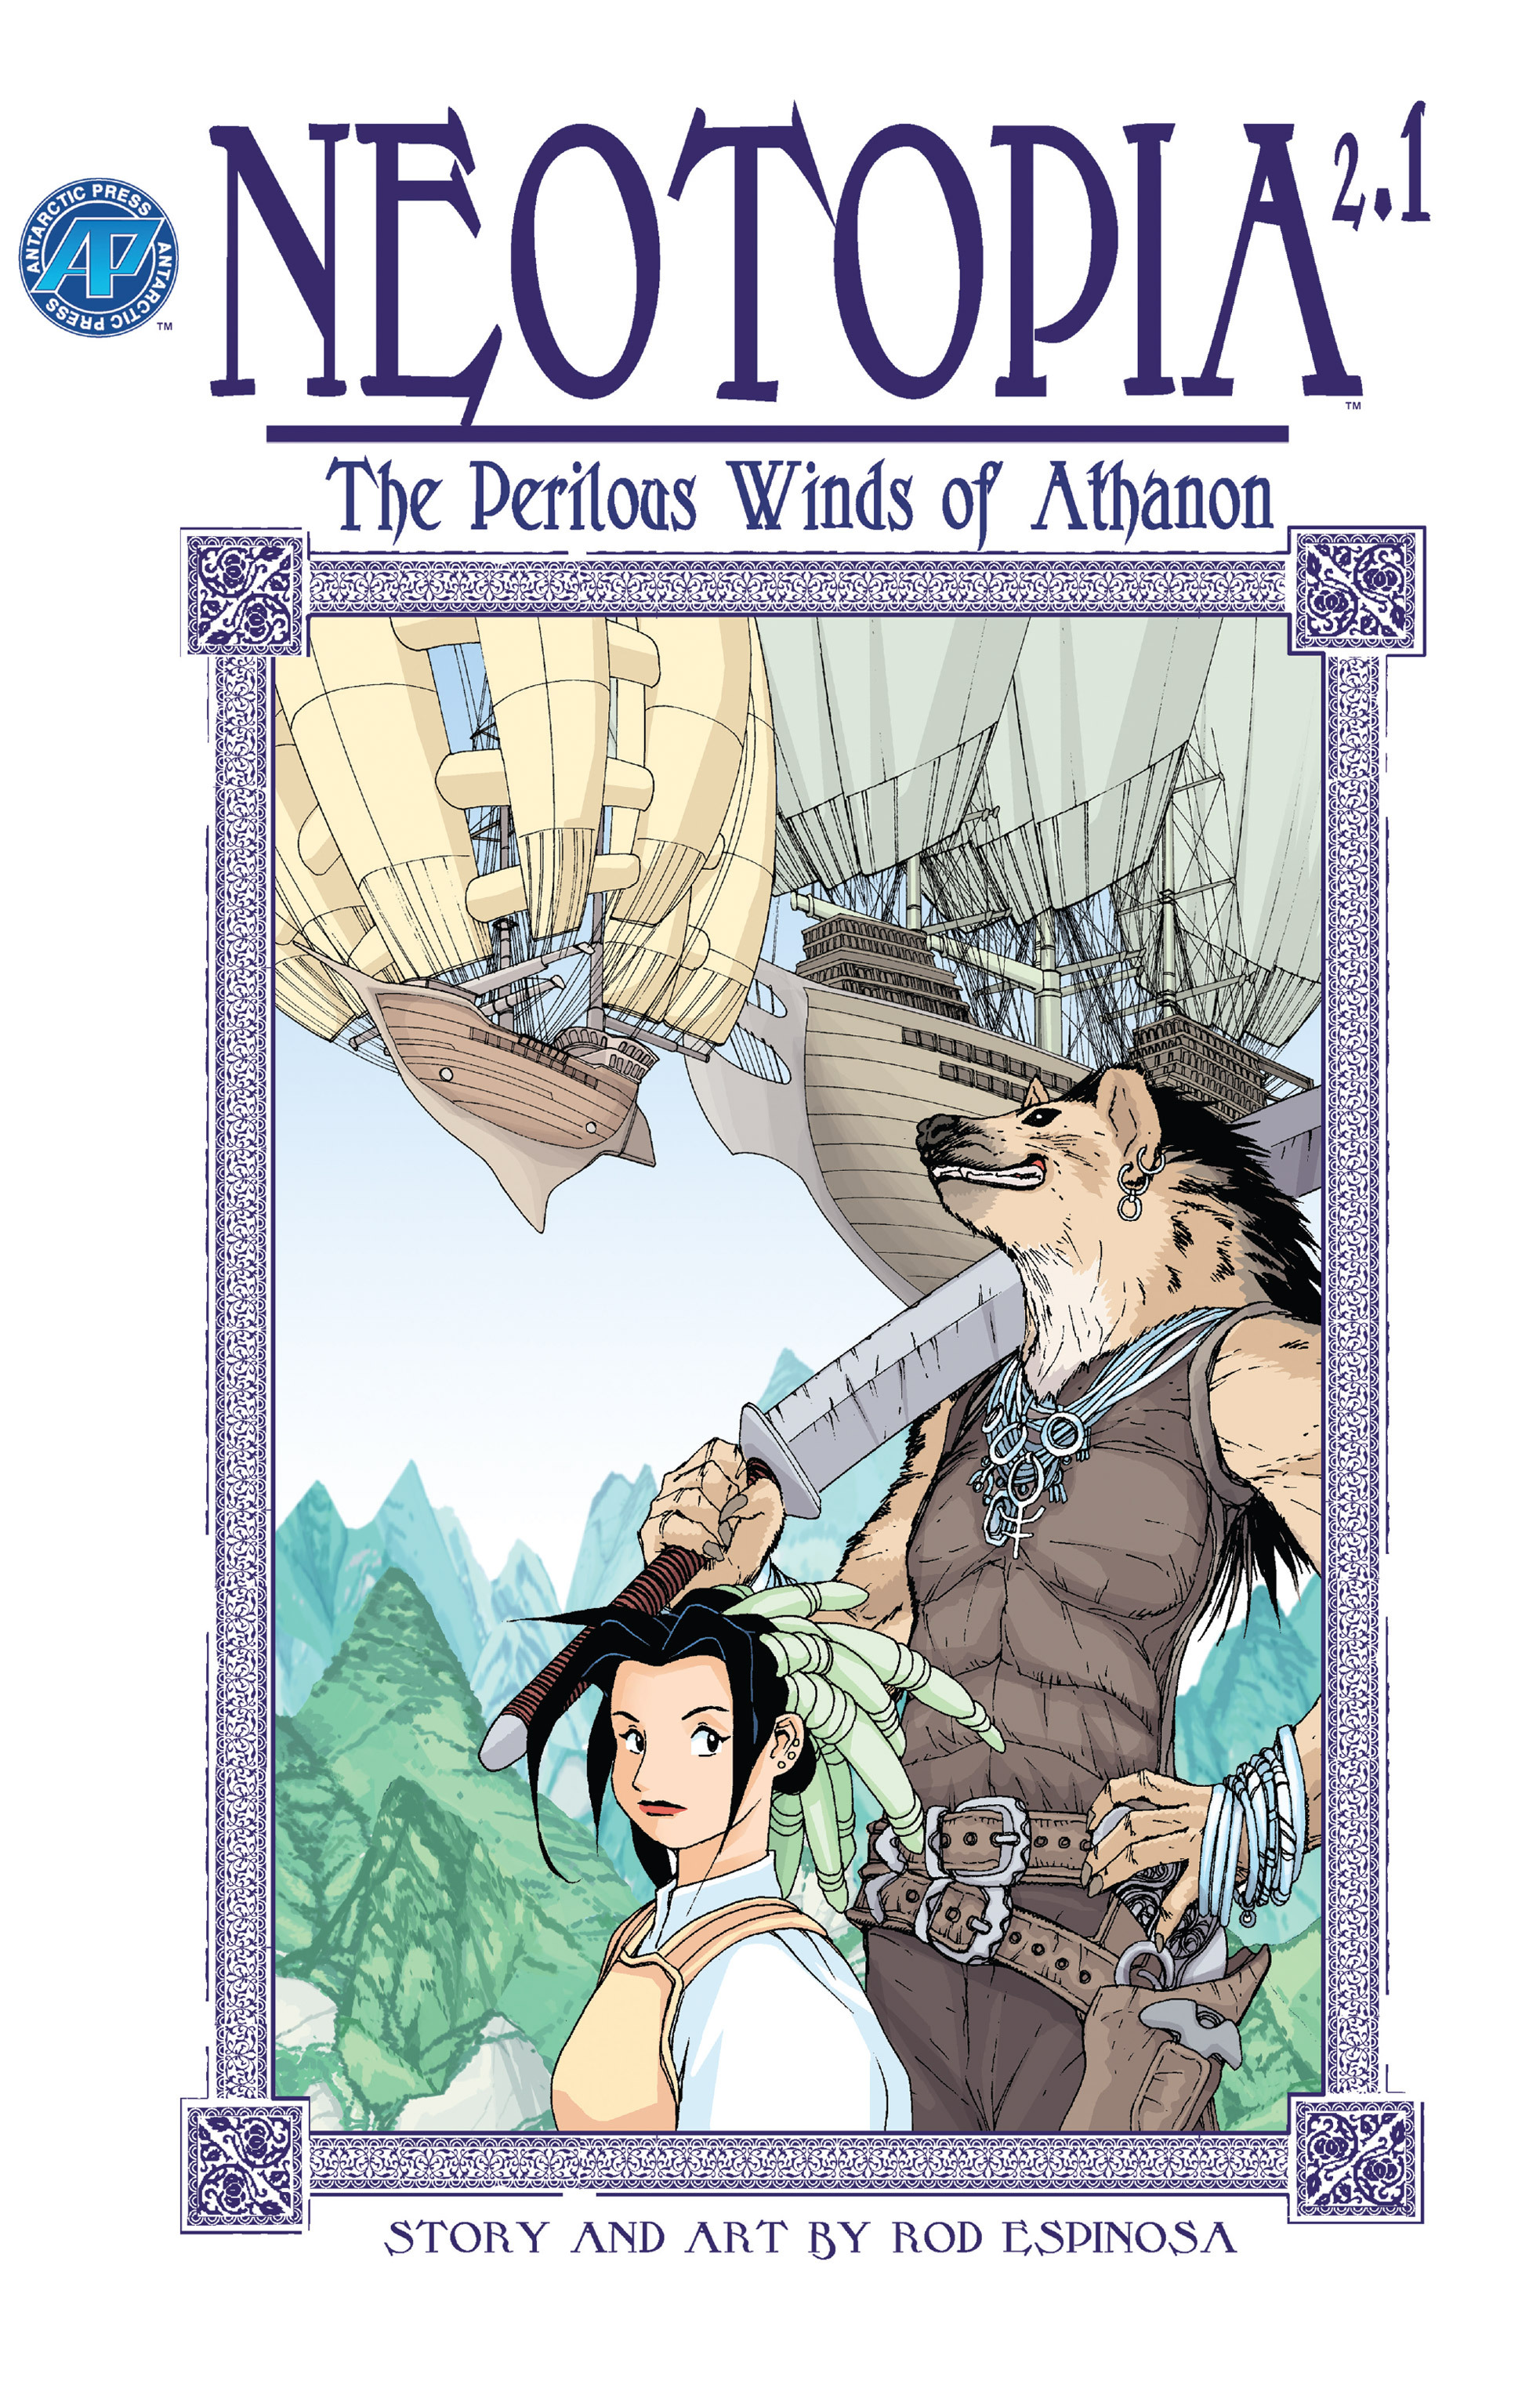 Read online Neotopia Vol. 2: The Perilous Winds of Athanon comic -  Issue #1 - 1